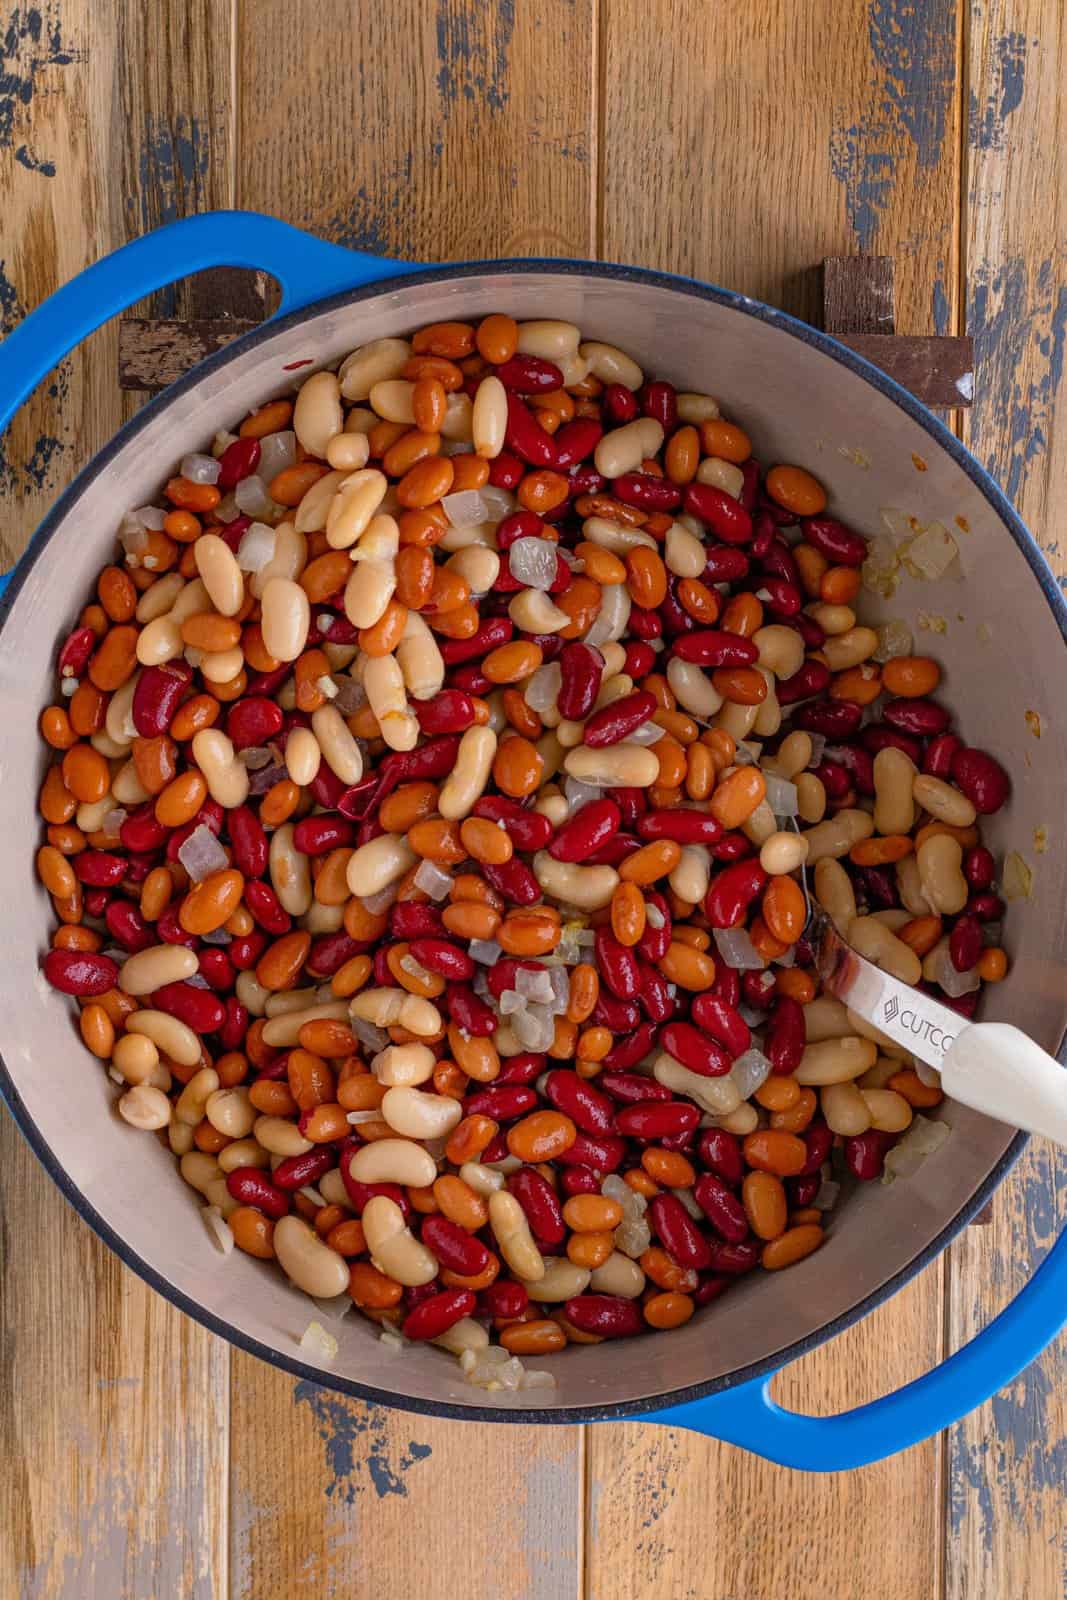 kidney beans, pinto beans and cannellini beans added to the large blue pot along with the onions. 